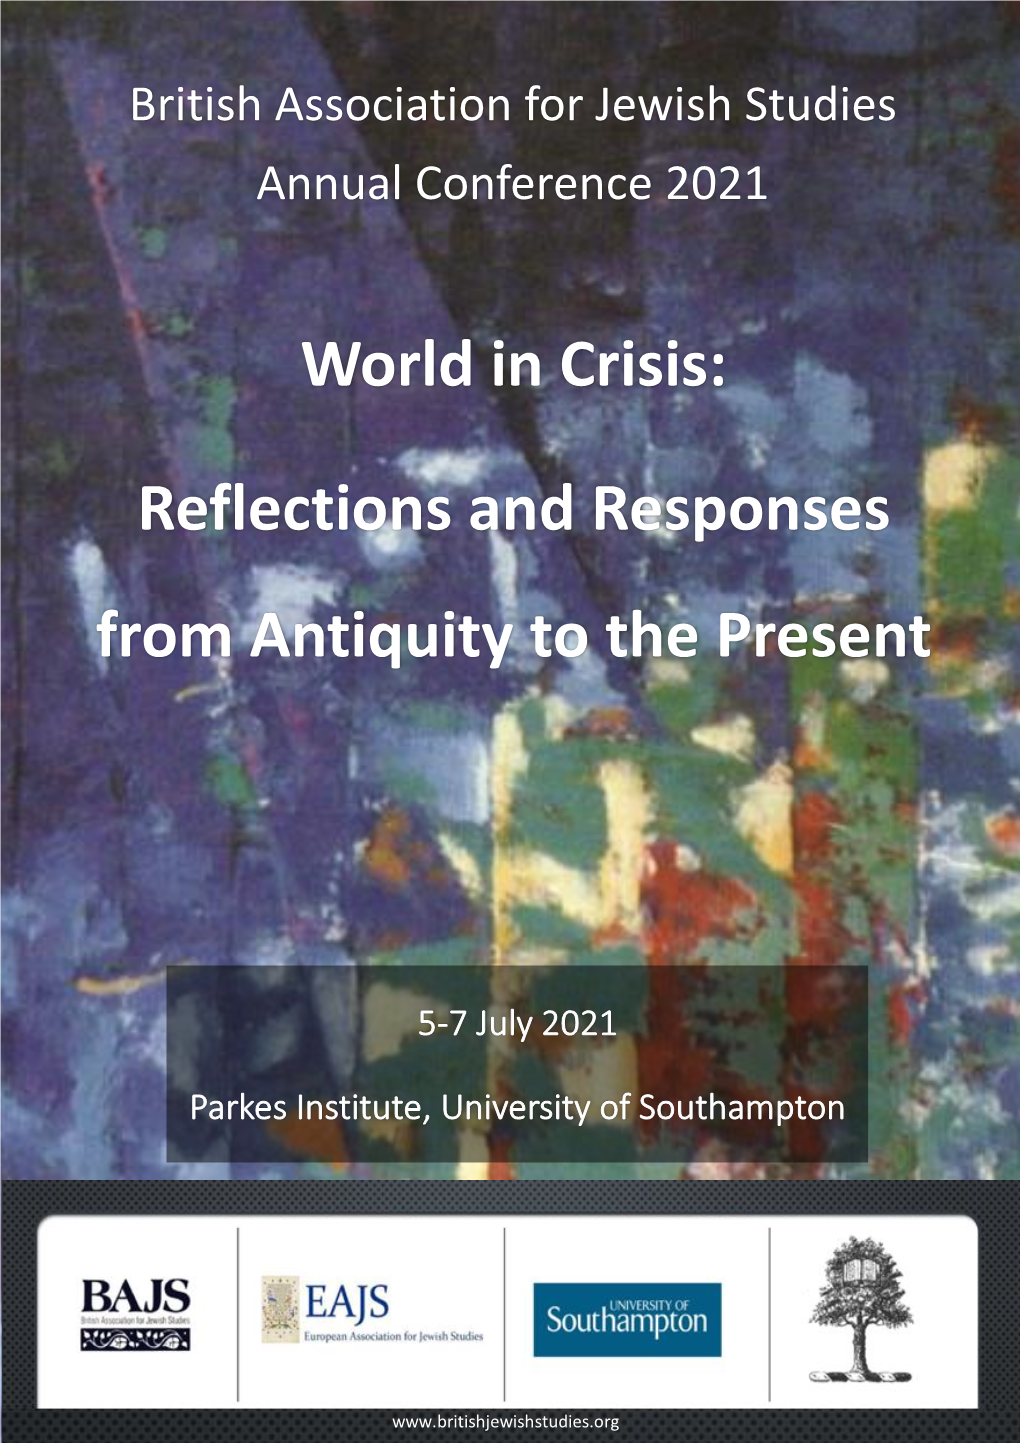 World in Crisis: Reflections and Responses from Antiquity to the Present